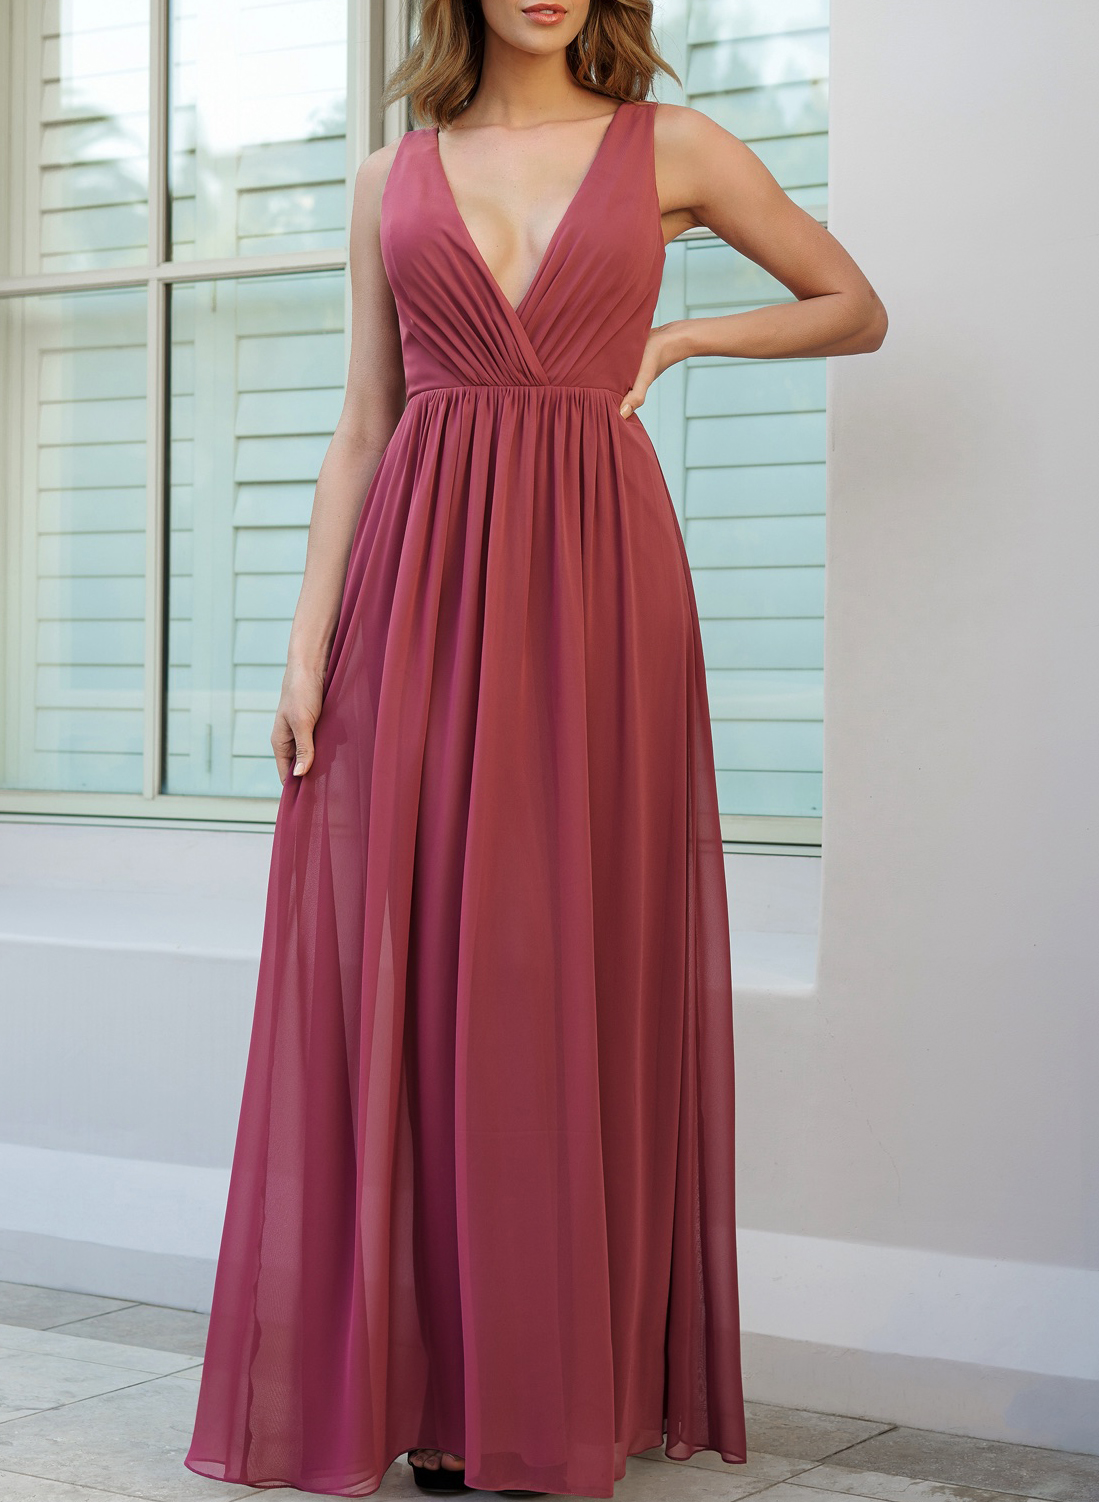 Open Back V-neck A-Line Bridesmaid Dresses With Chiffon